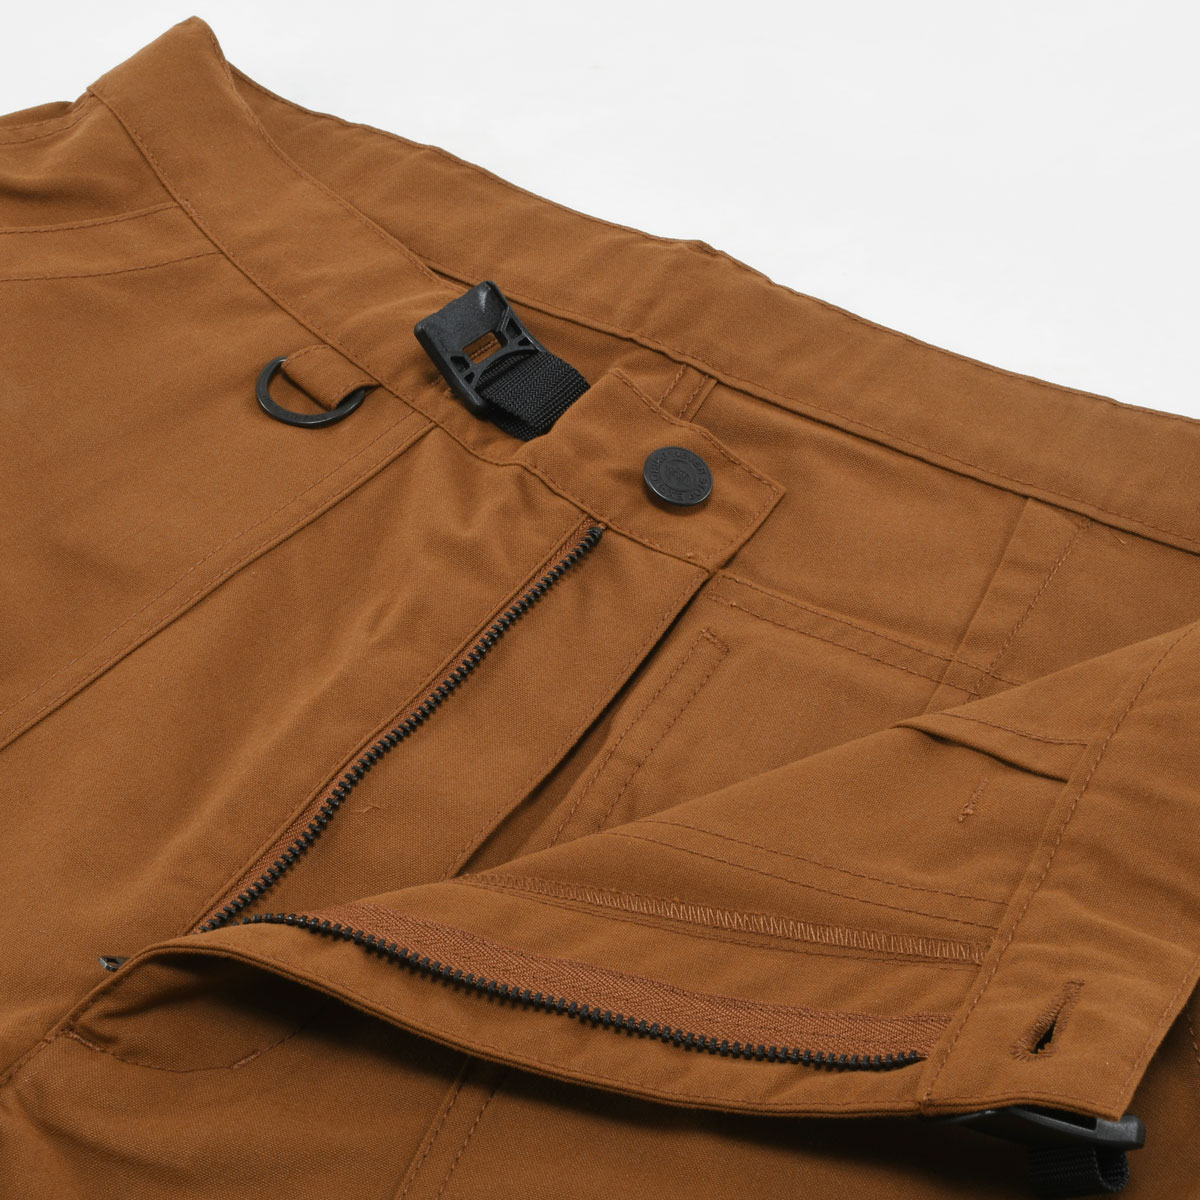 【THE NORTH FACE】 FIREFLY BAKER PANTS NB82137 (PB)